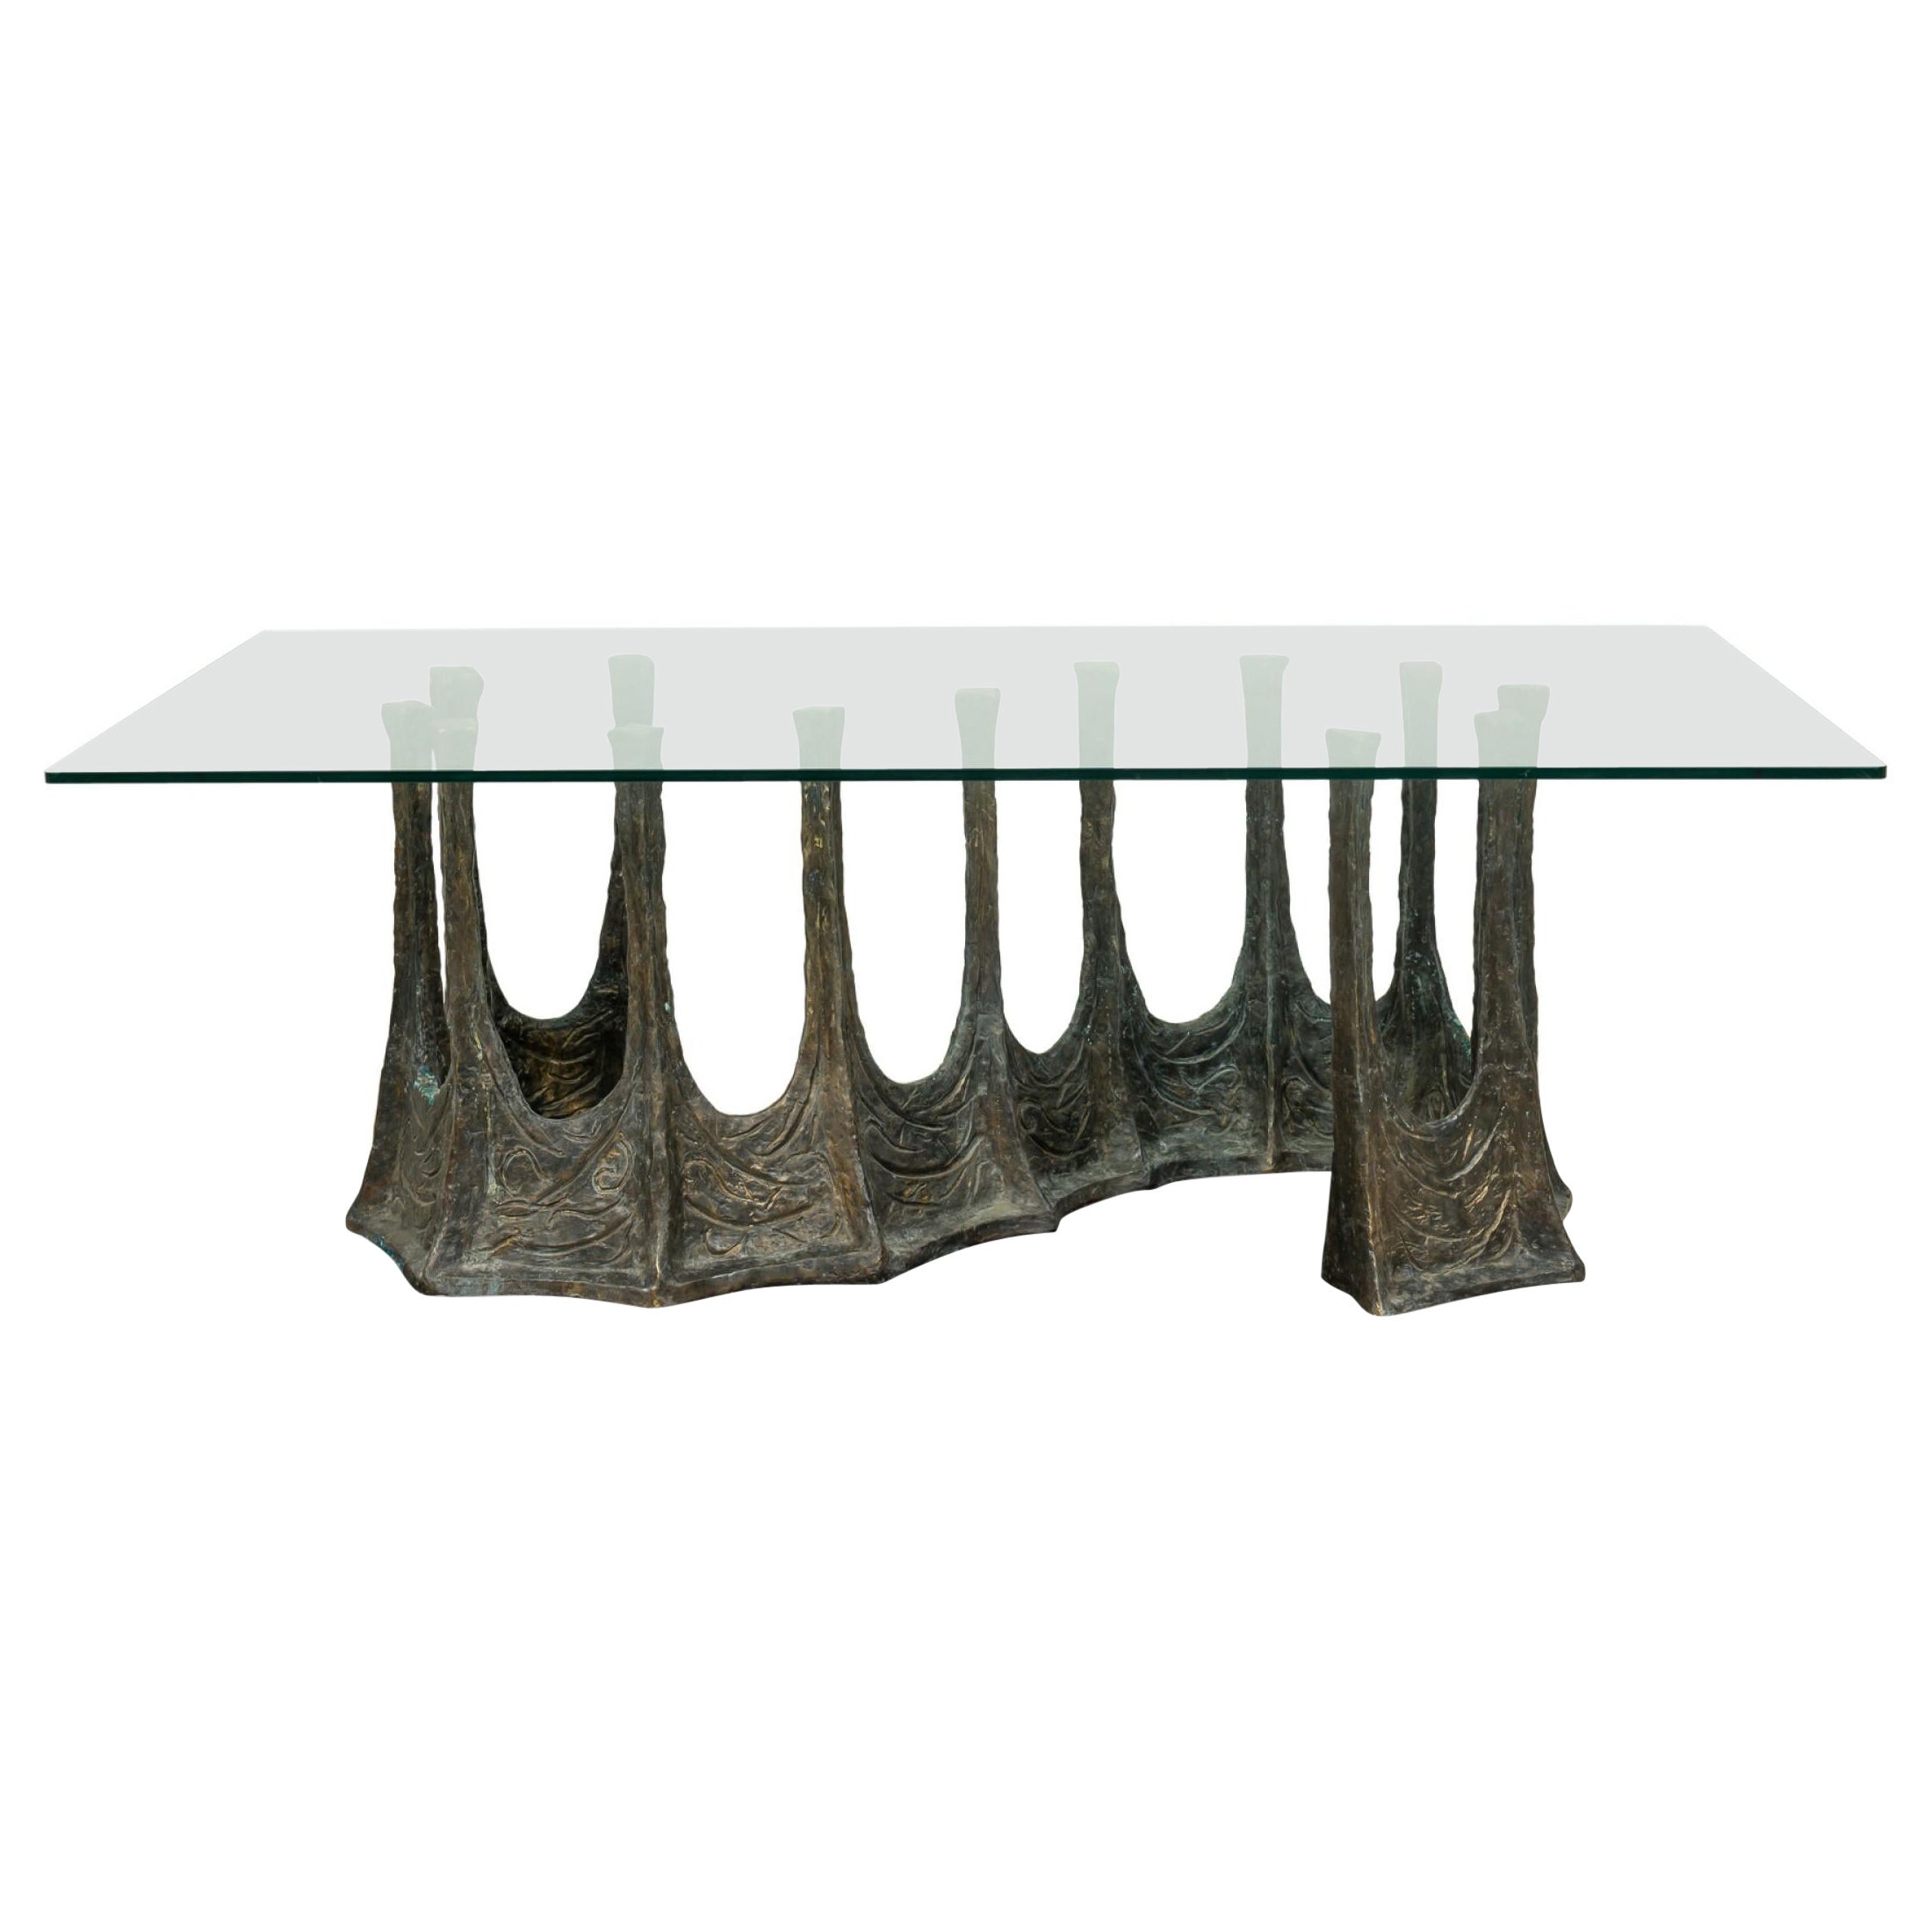 "Guarda" Organic S-Shaped Sculptural Bronze and Glass Dining / Conference Table For Sale